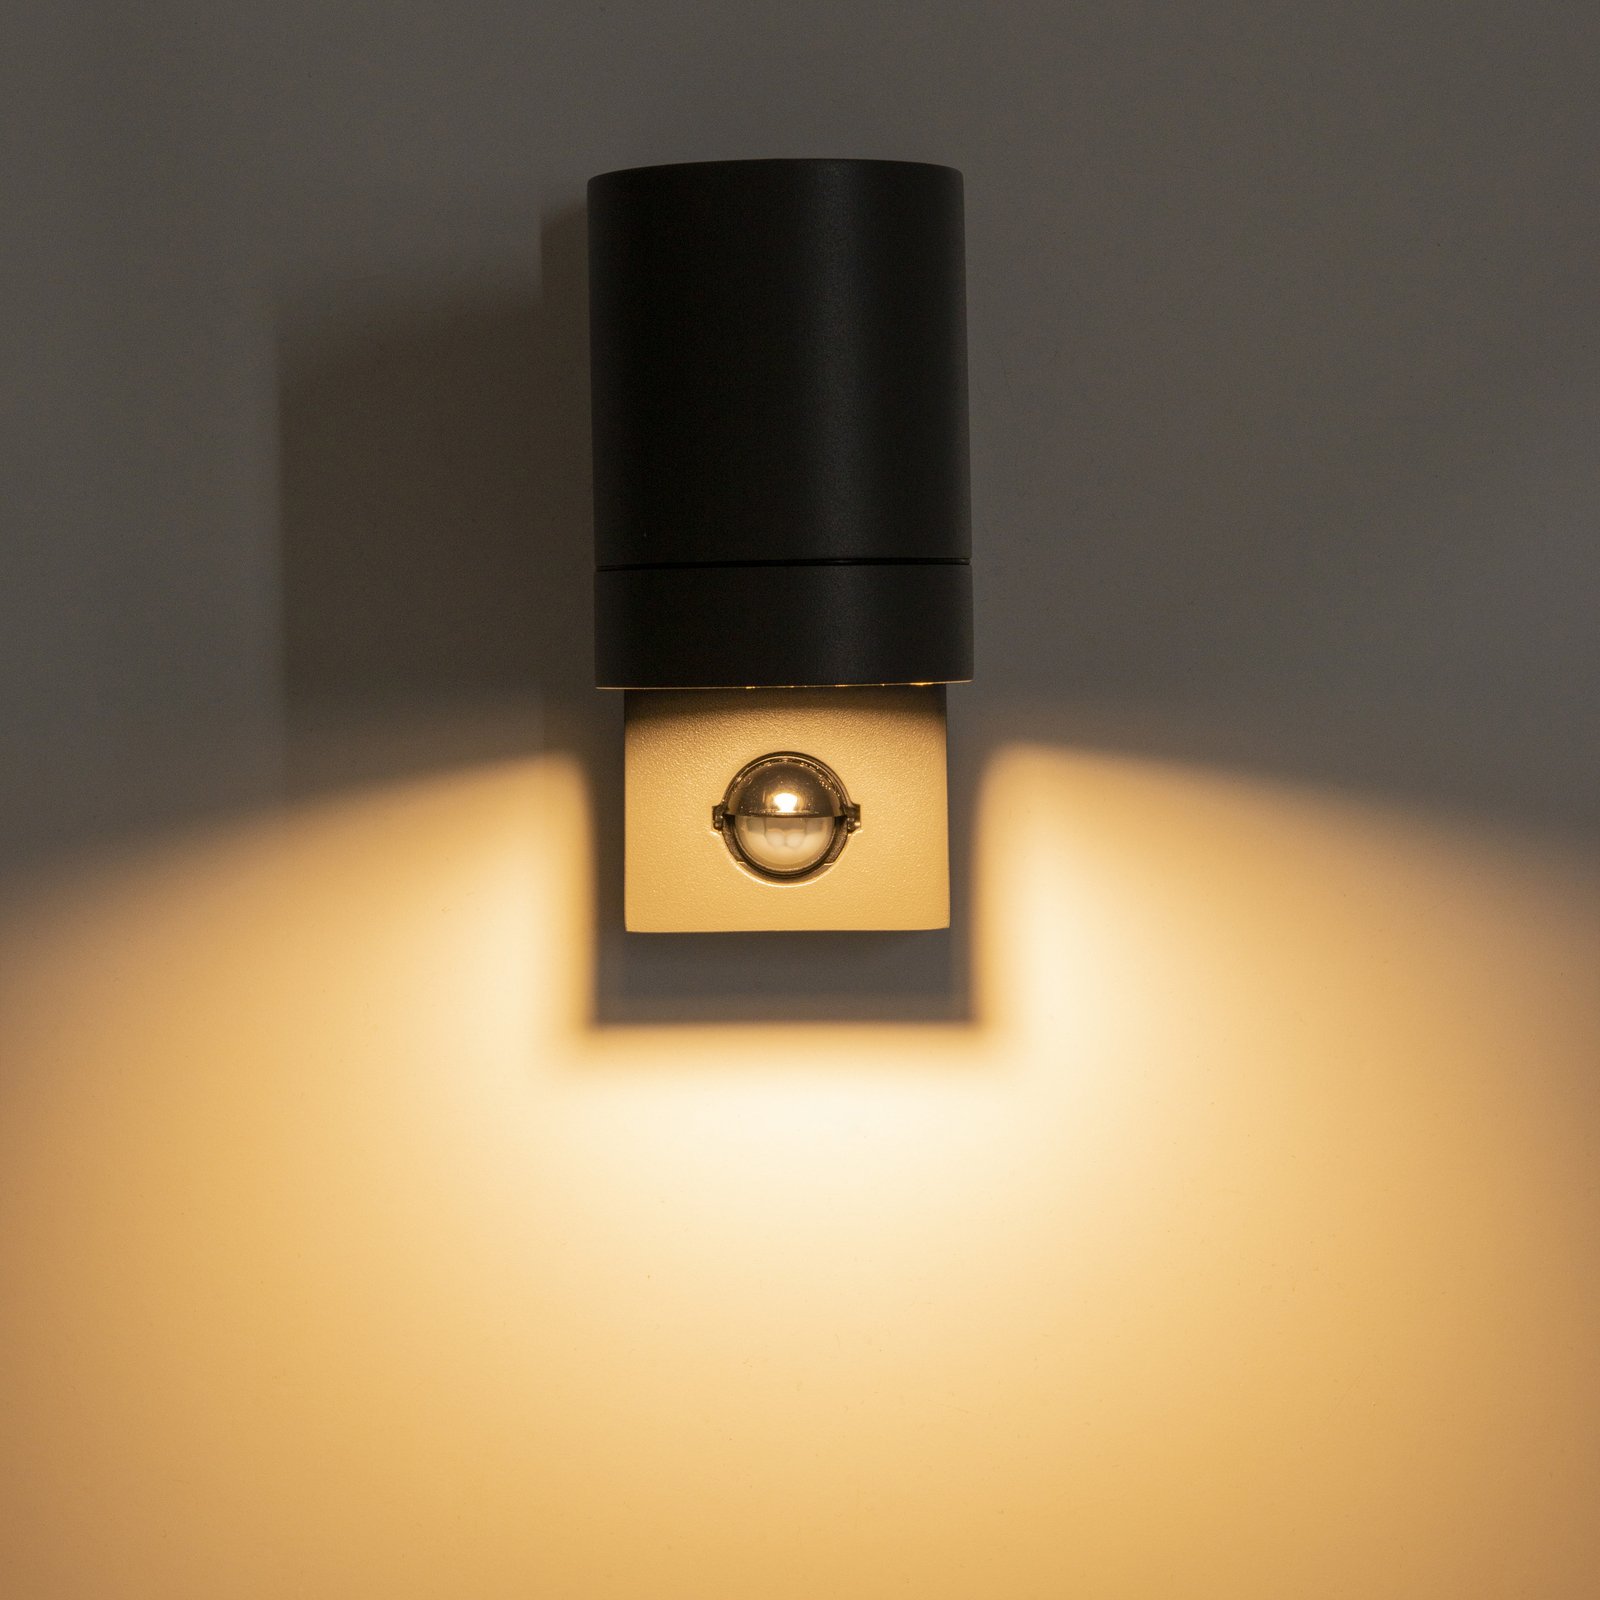 Rombe outdoor wall light with a sensor, one-bulb